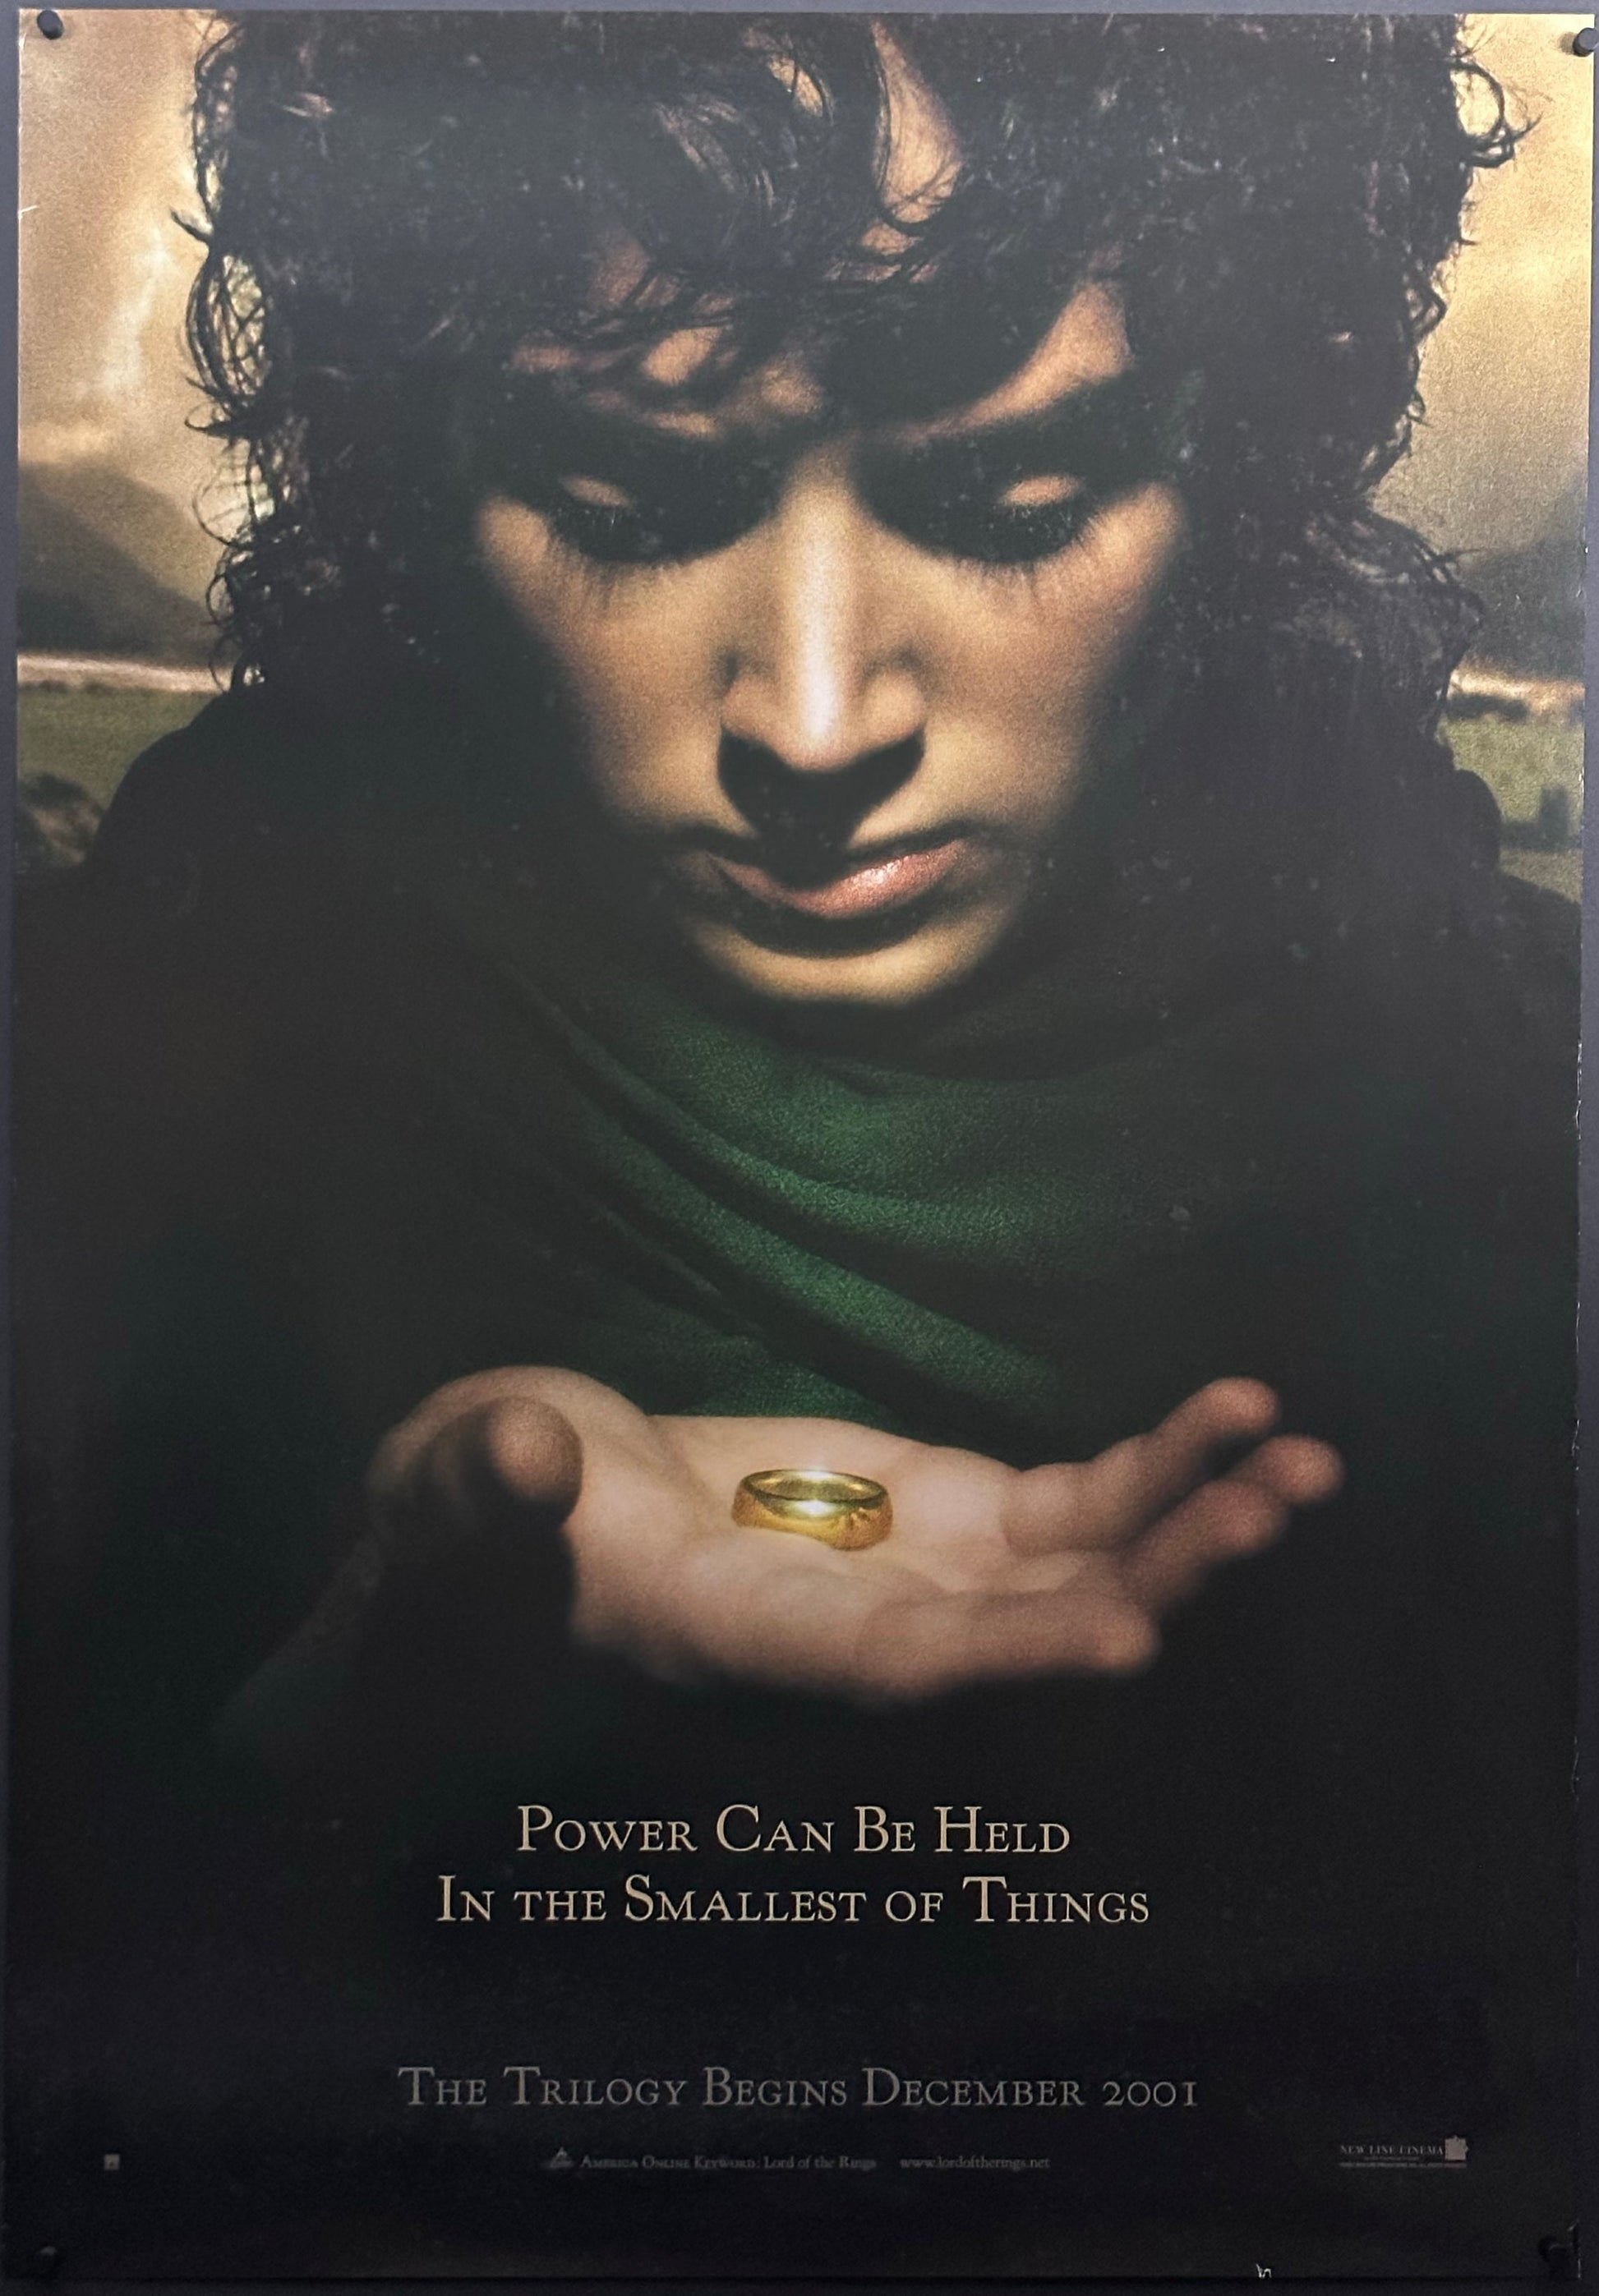 The Lord Of The Rings: The Fellowship Of The Ring US One Sheet "Power" Teaser Style (2001) - ORIGINAL RELEASE - posterpalace.com